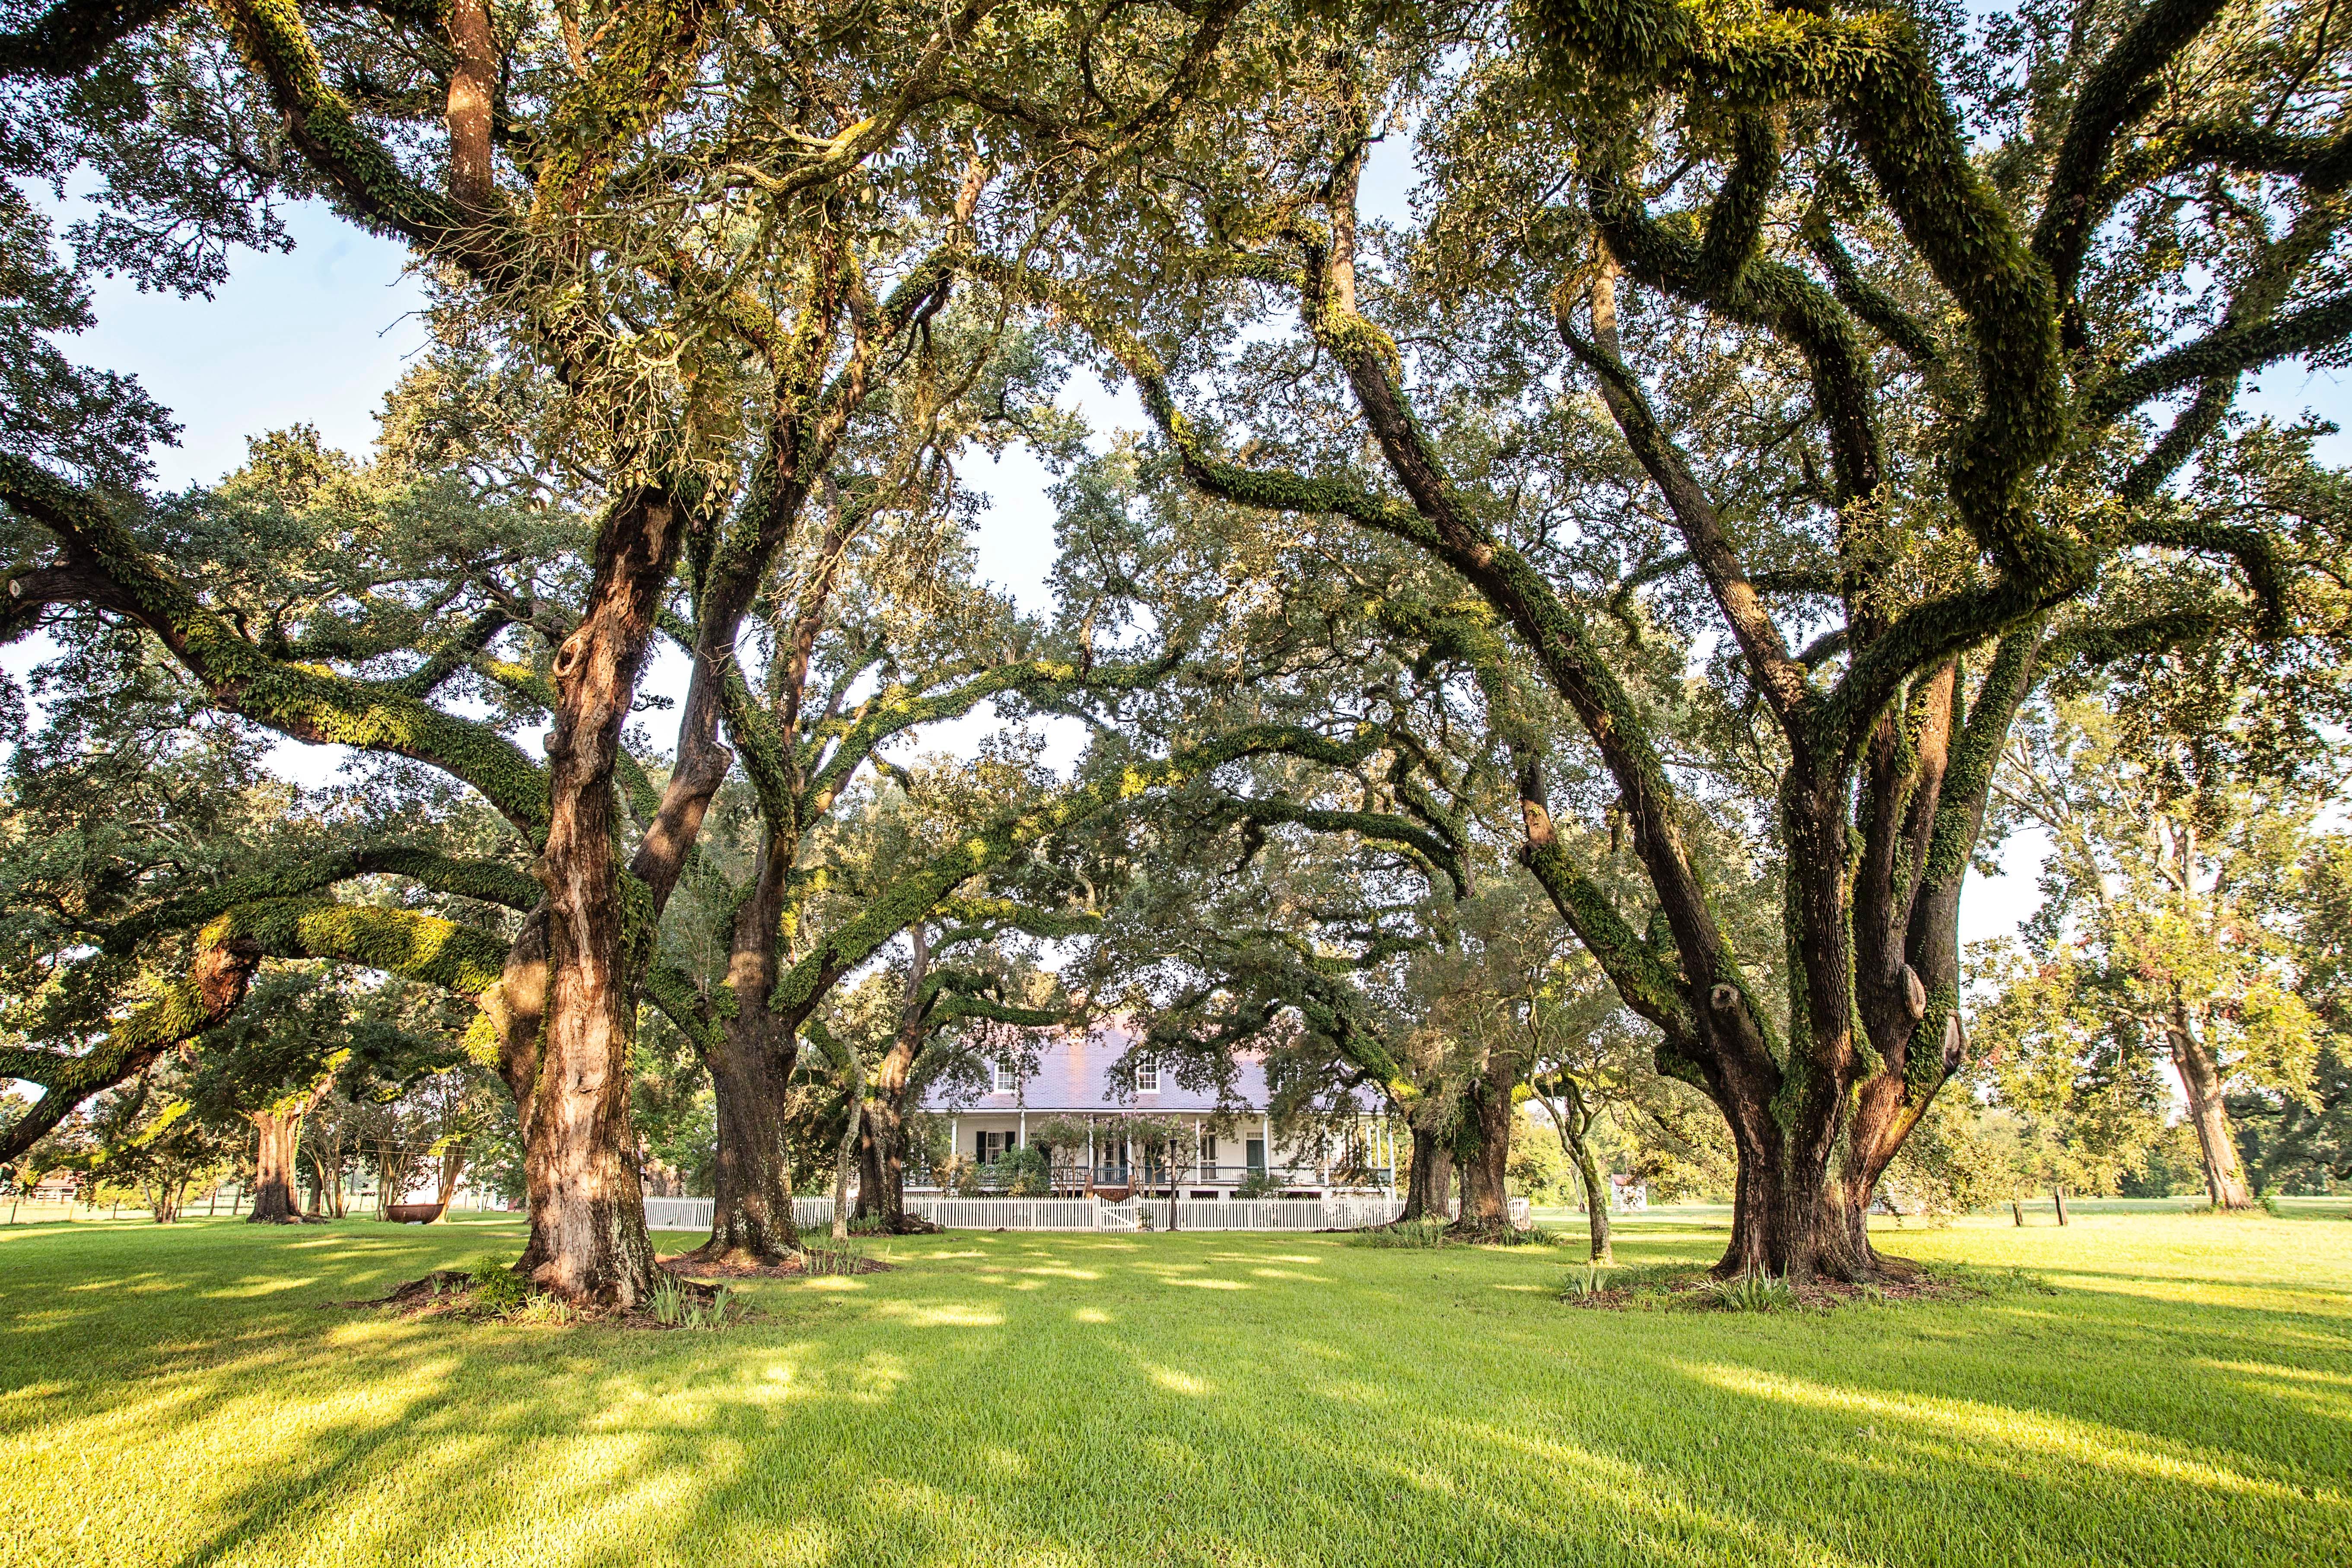 Two rows of Live Oak trees stretch from the Cane River to the Oakland Plantation Main House.